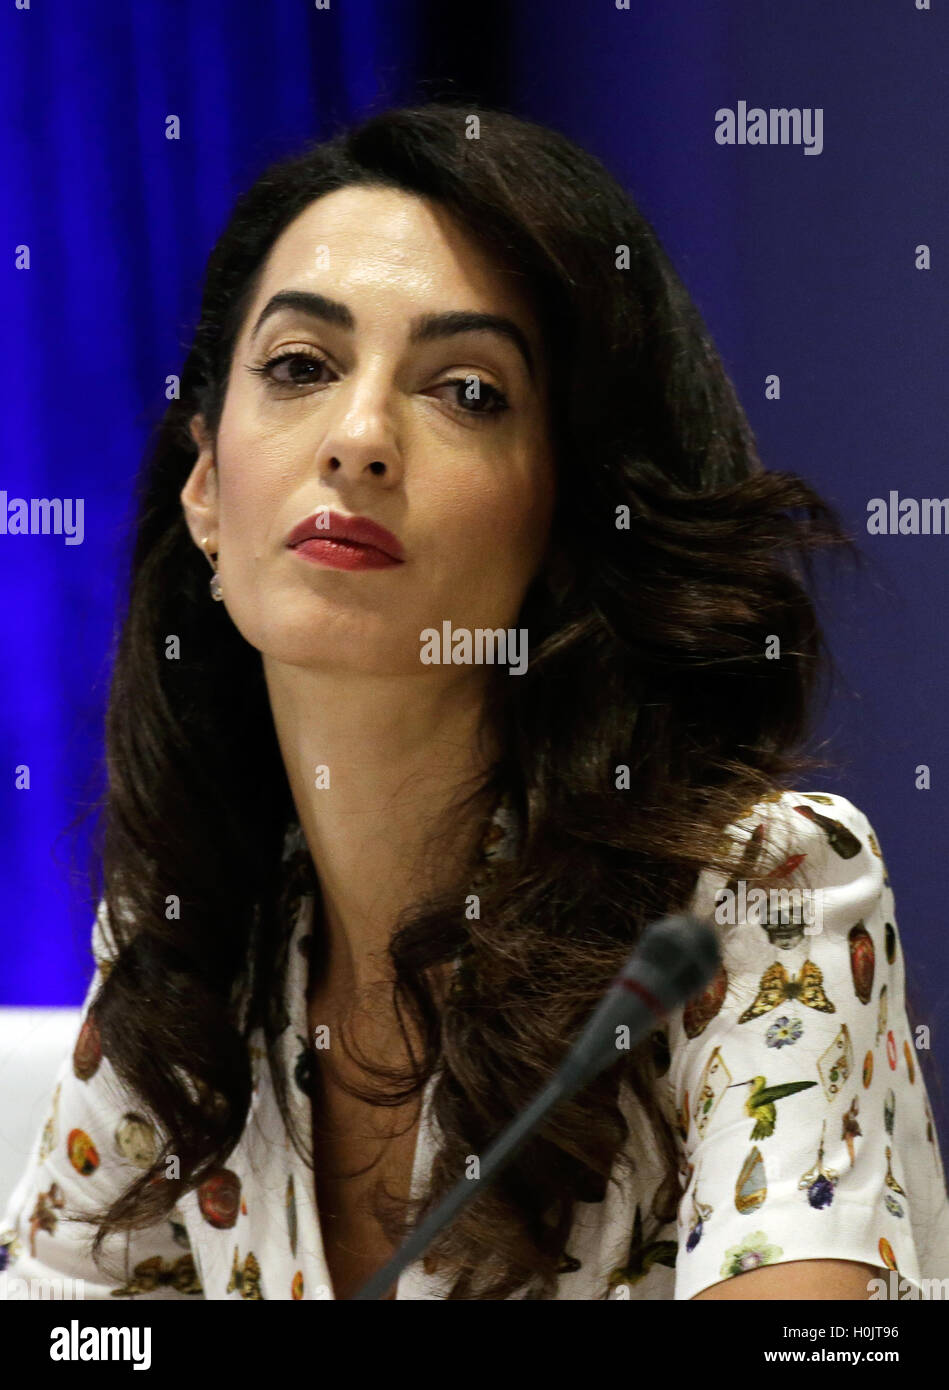 Lebanese-British lawyer, Amal Clooney attends a Private Sector Call to Action Leaders Summit for Refugees during the United Nations 71st session of the General Debate at the United Nations General Assembly at United Nations headquarters in New York, New York, USA, 20 September 2016. Credit: Peter Foley / Pool via CNP /MediaPunch Stock Photo